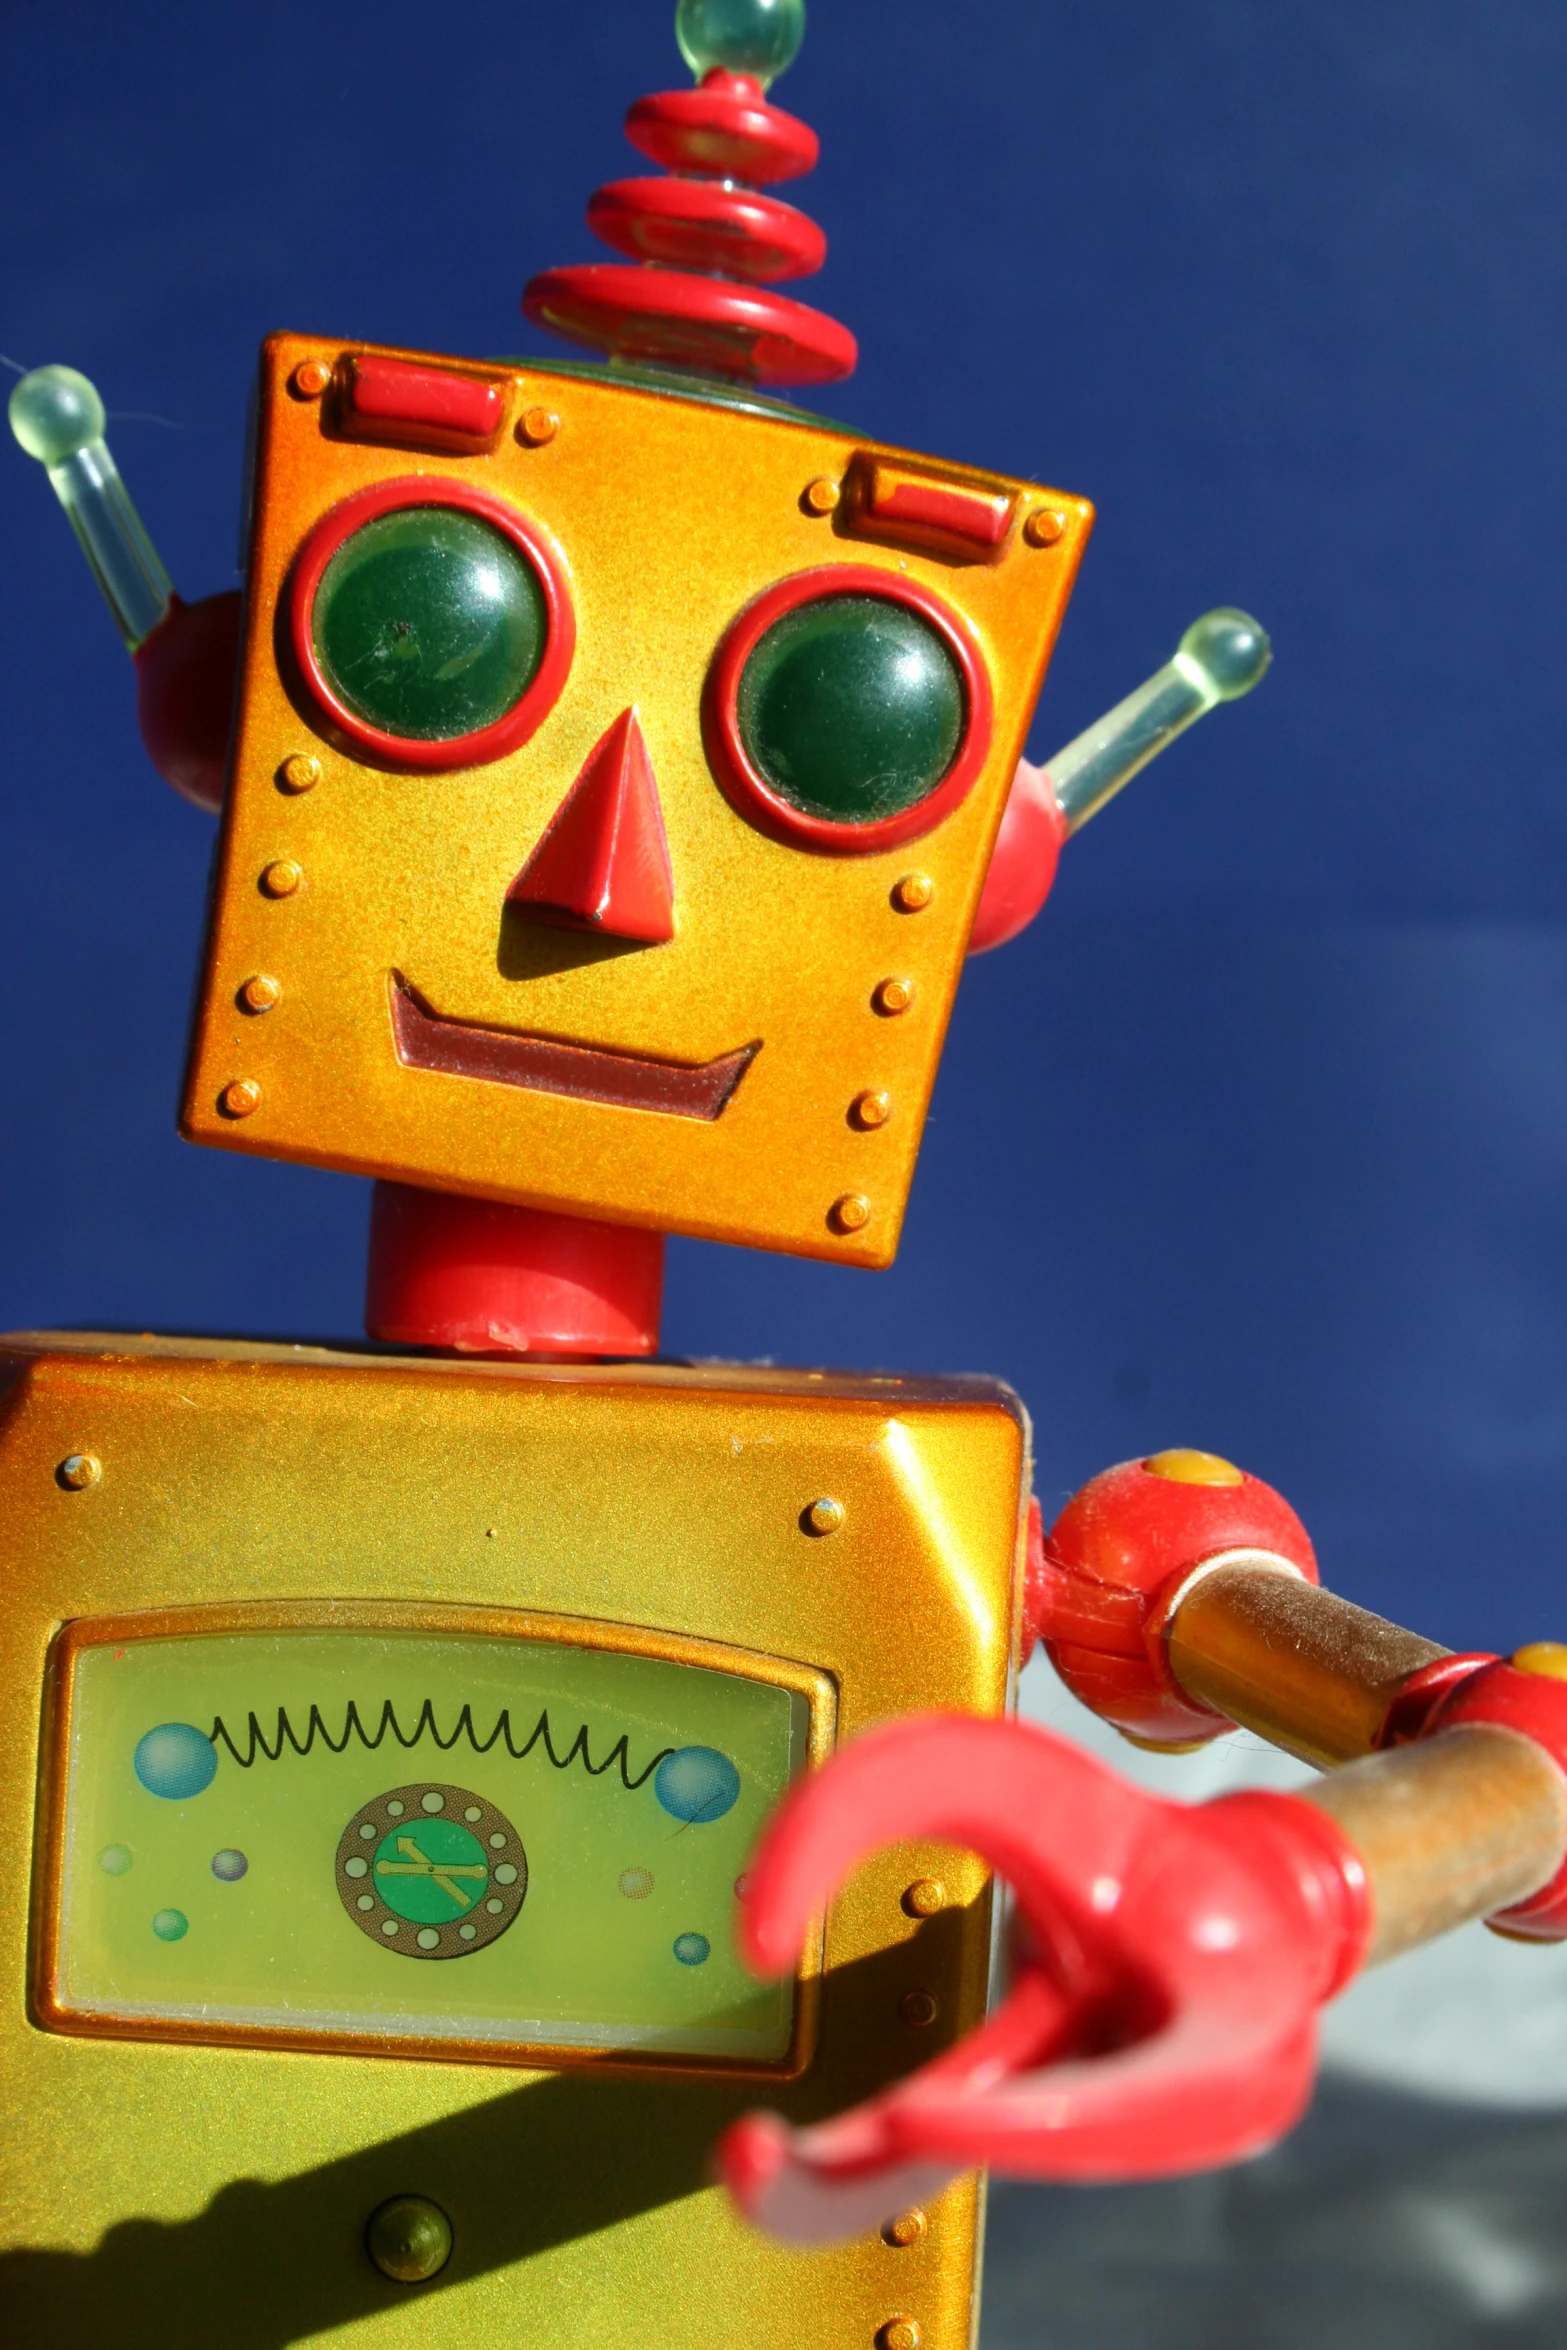 a toy robot with red handles and eyes holds a red object